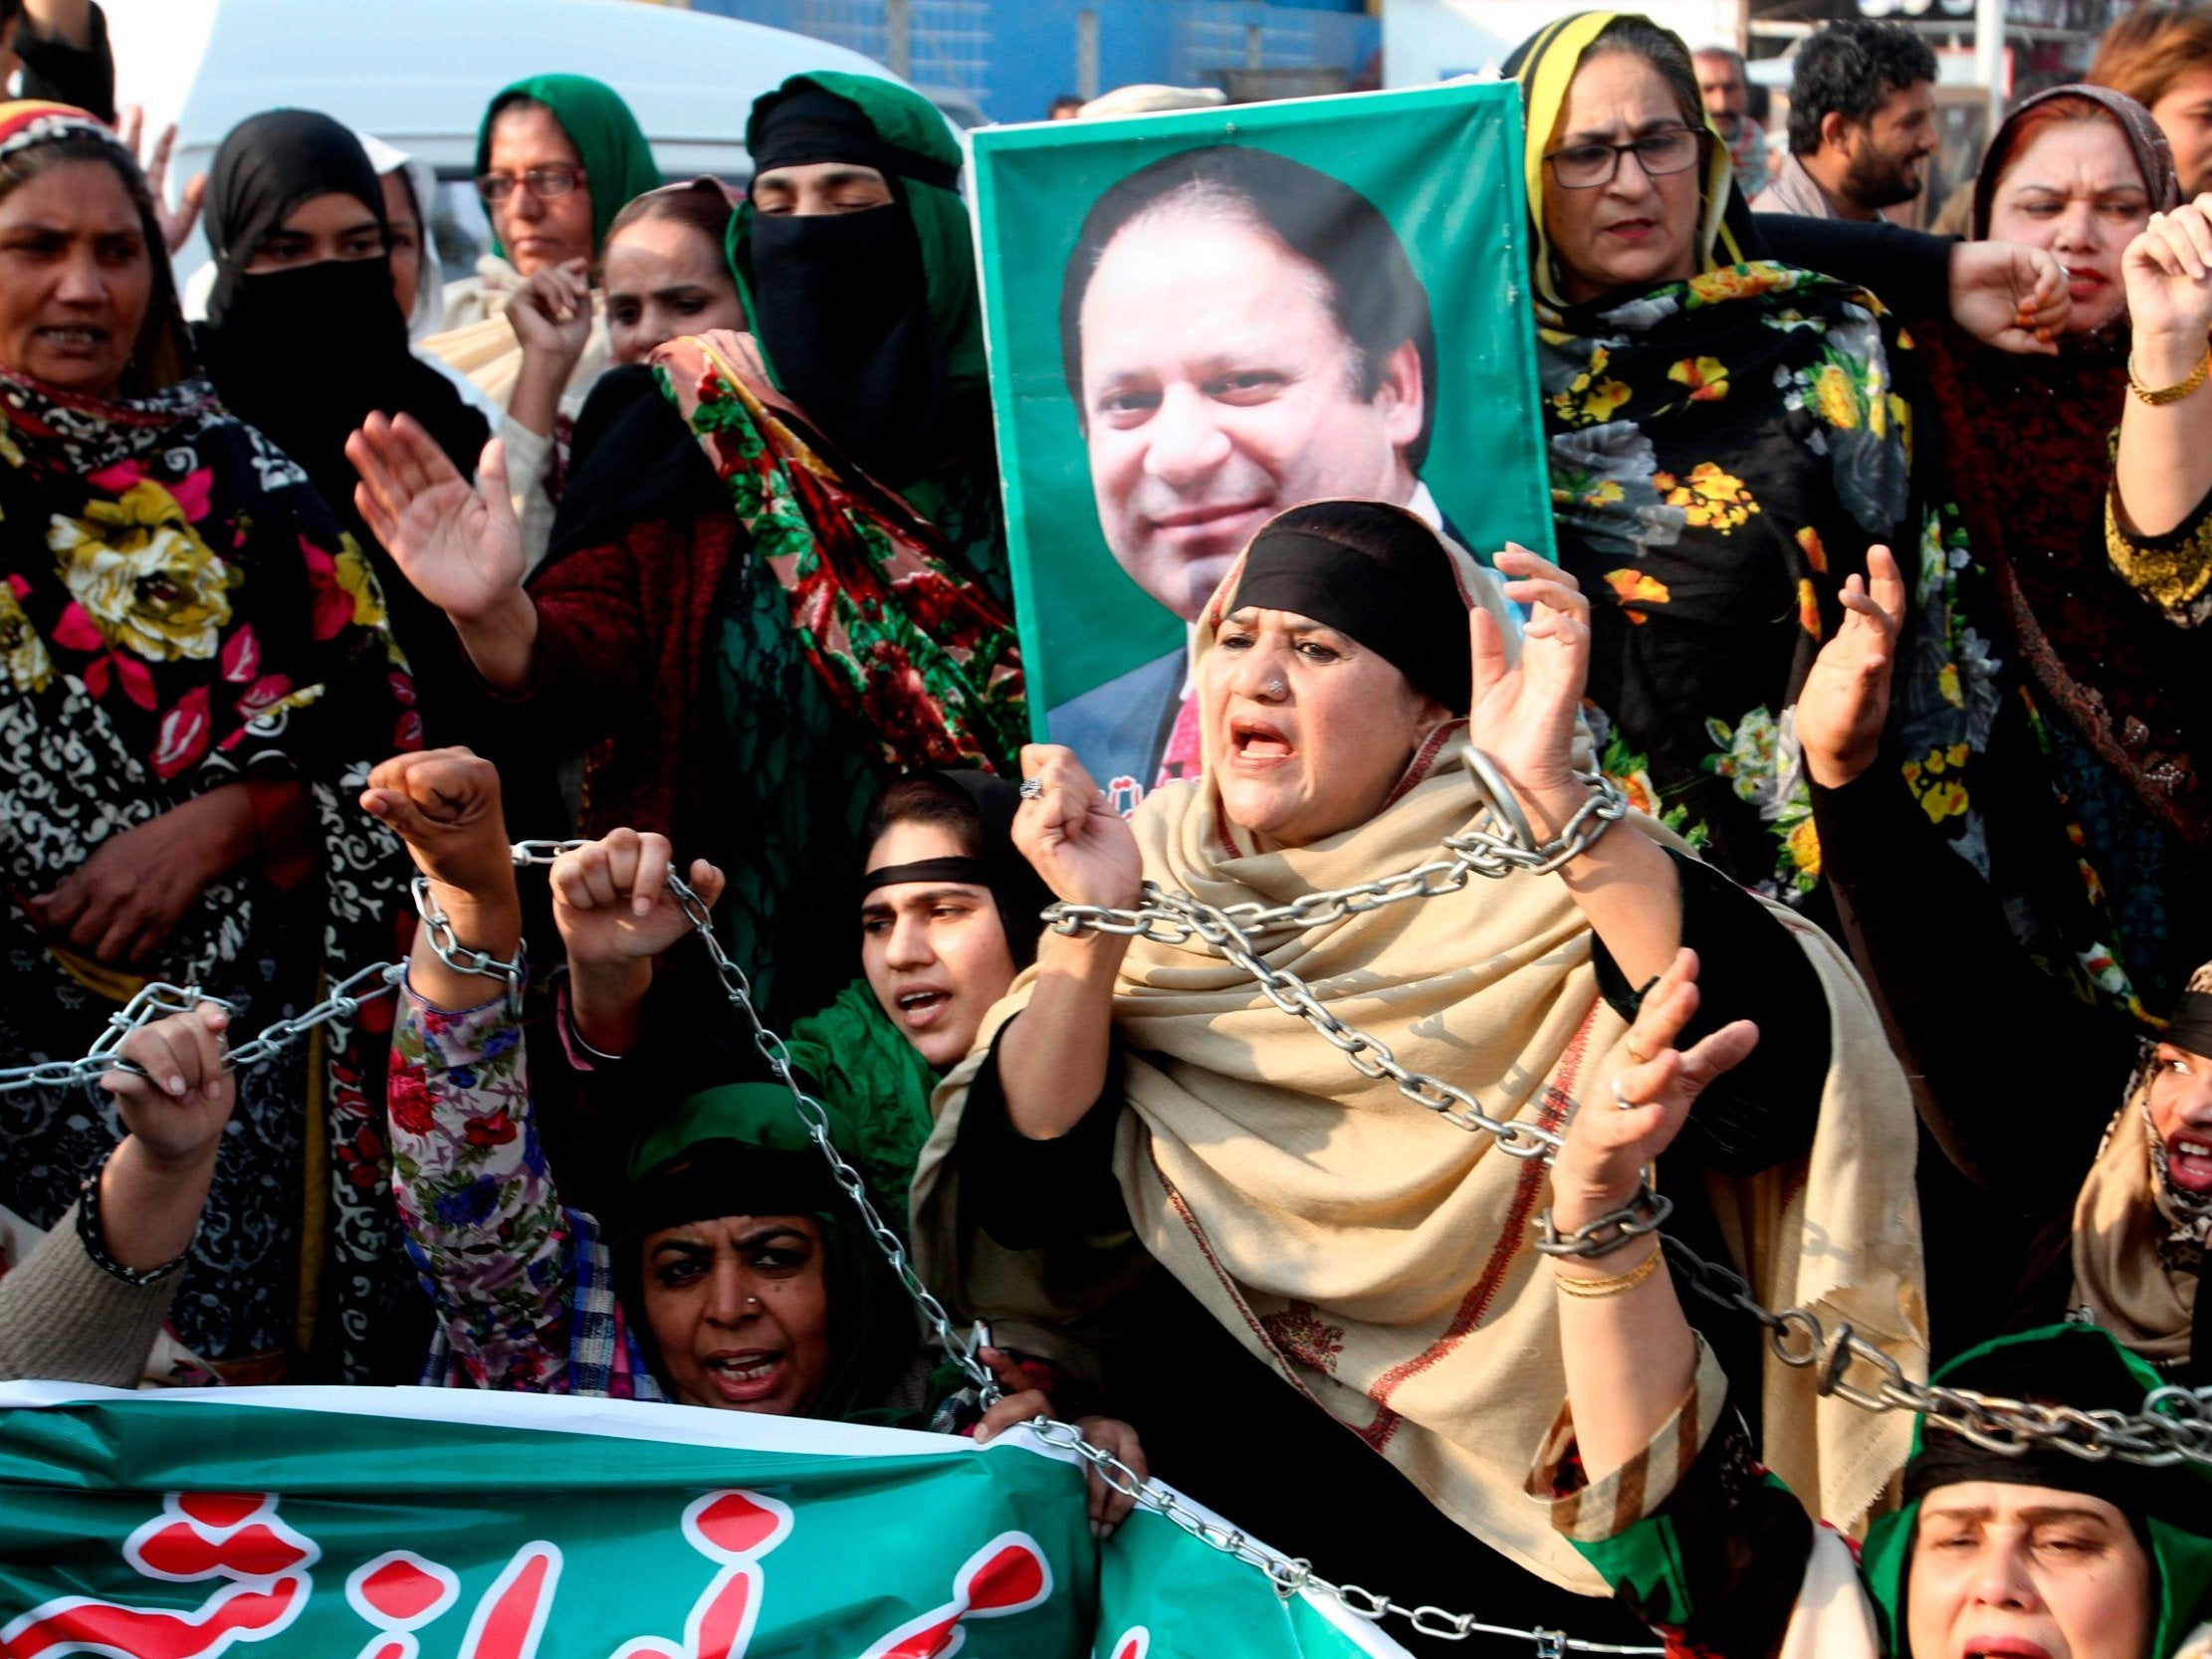 Supporters of former Pakistani Prime Minister Nawaz Sharif protest against a court ruling, in Multan, Pakistan, Monday, 24 December 2018